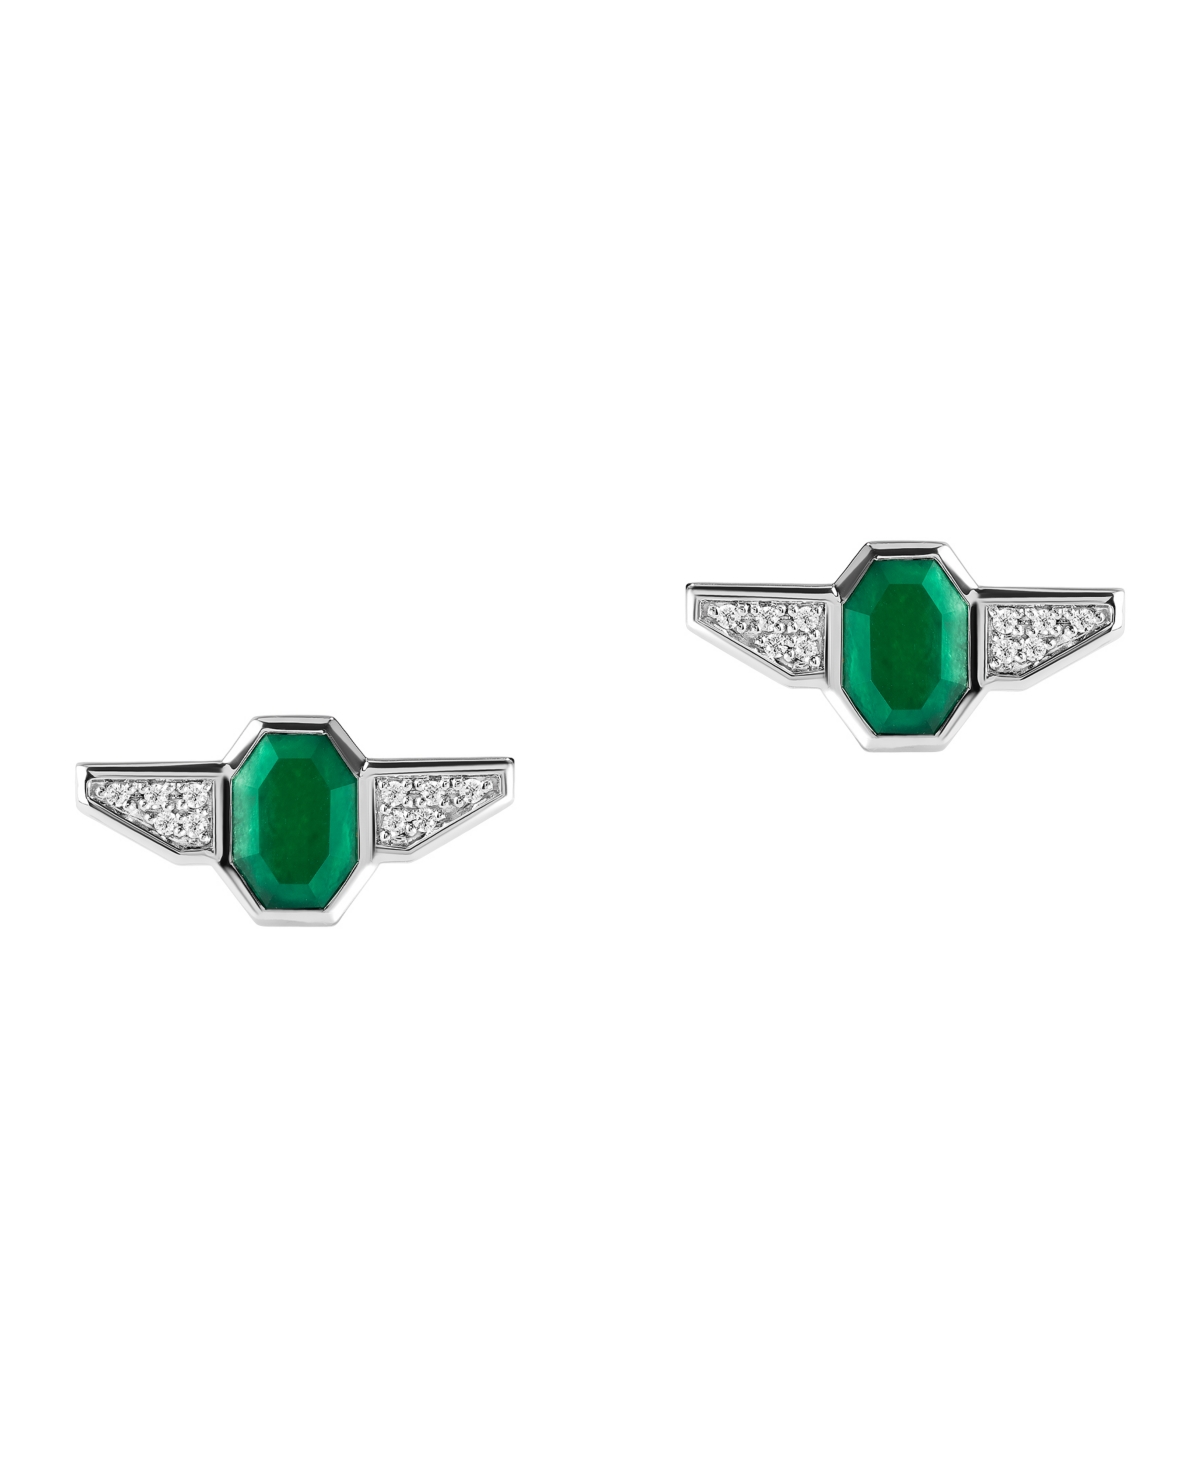 Star Wars The Jedi Master Diamond And Green Agate Stud Earrings (1/10 Ct. T.w.) In Sterling Silver